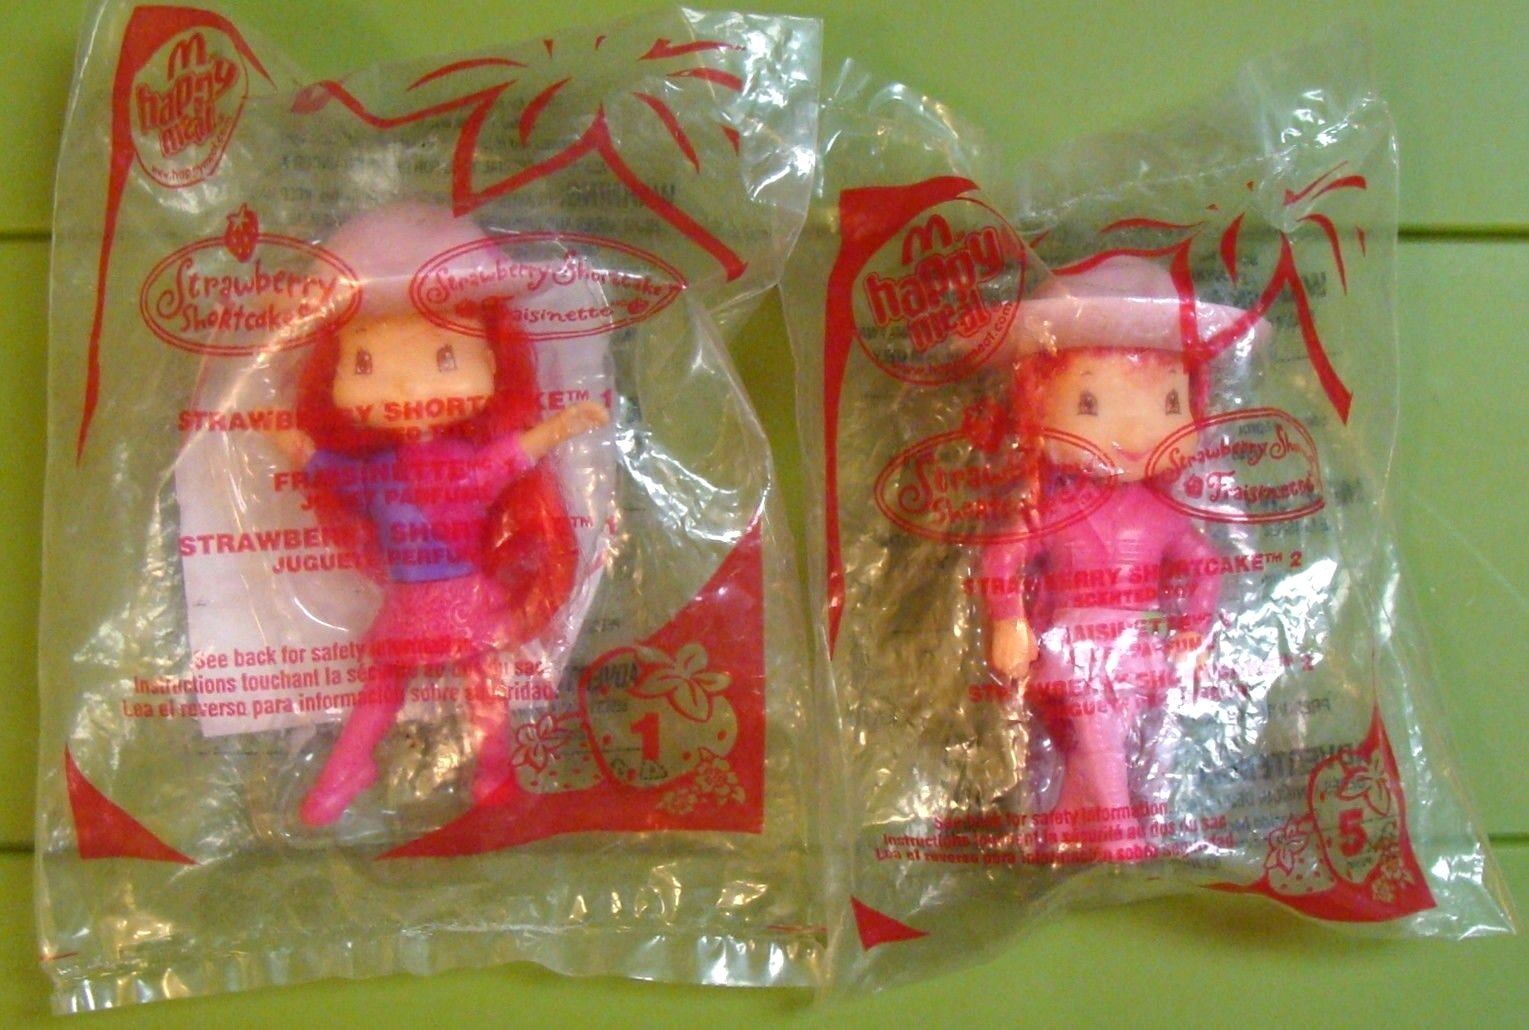 Scented Strawberry #1 Details about   2007 Strawberry Shortcake McDonalds Happy Meal Toy 